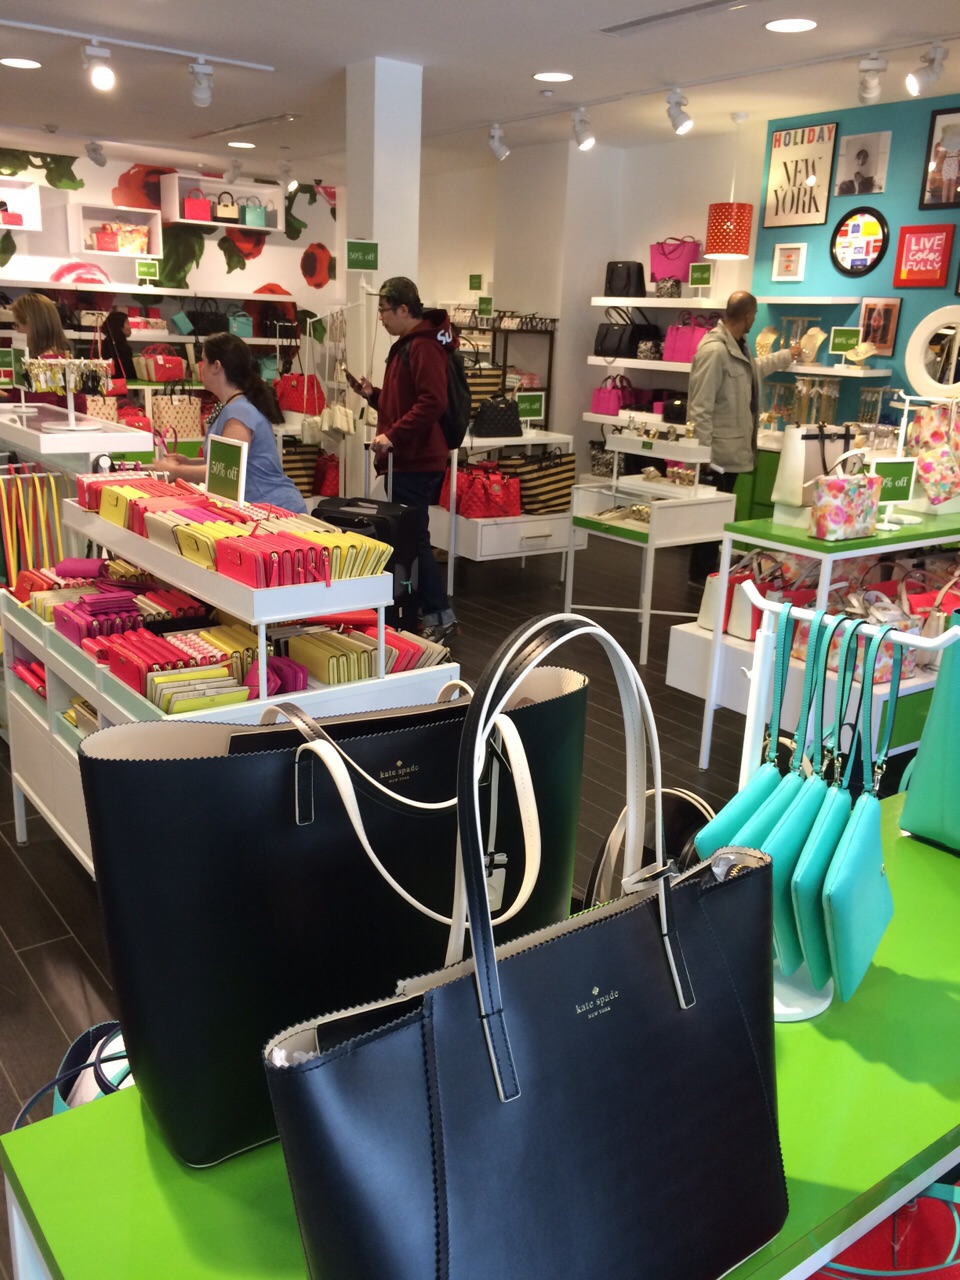 Back to School Shopping at Woodbury Common - Weekend Jaunts